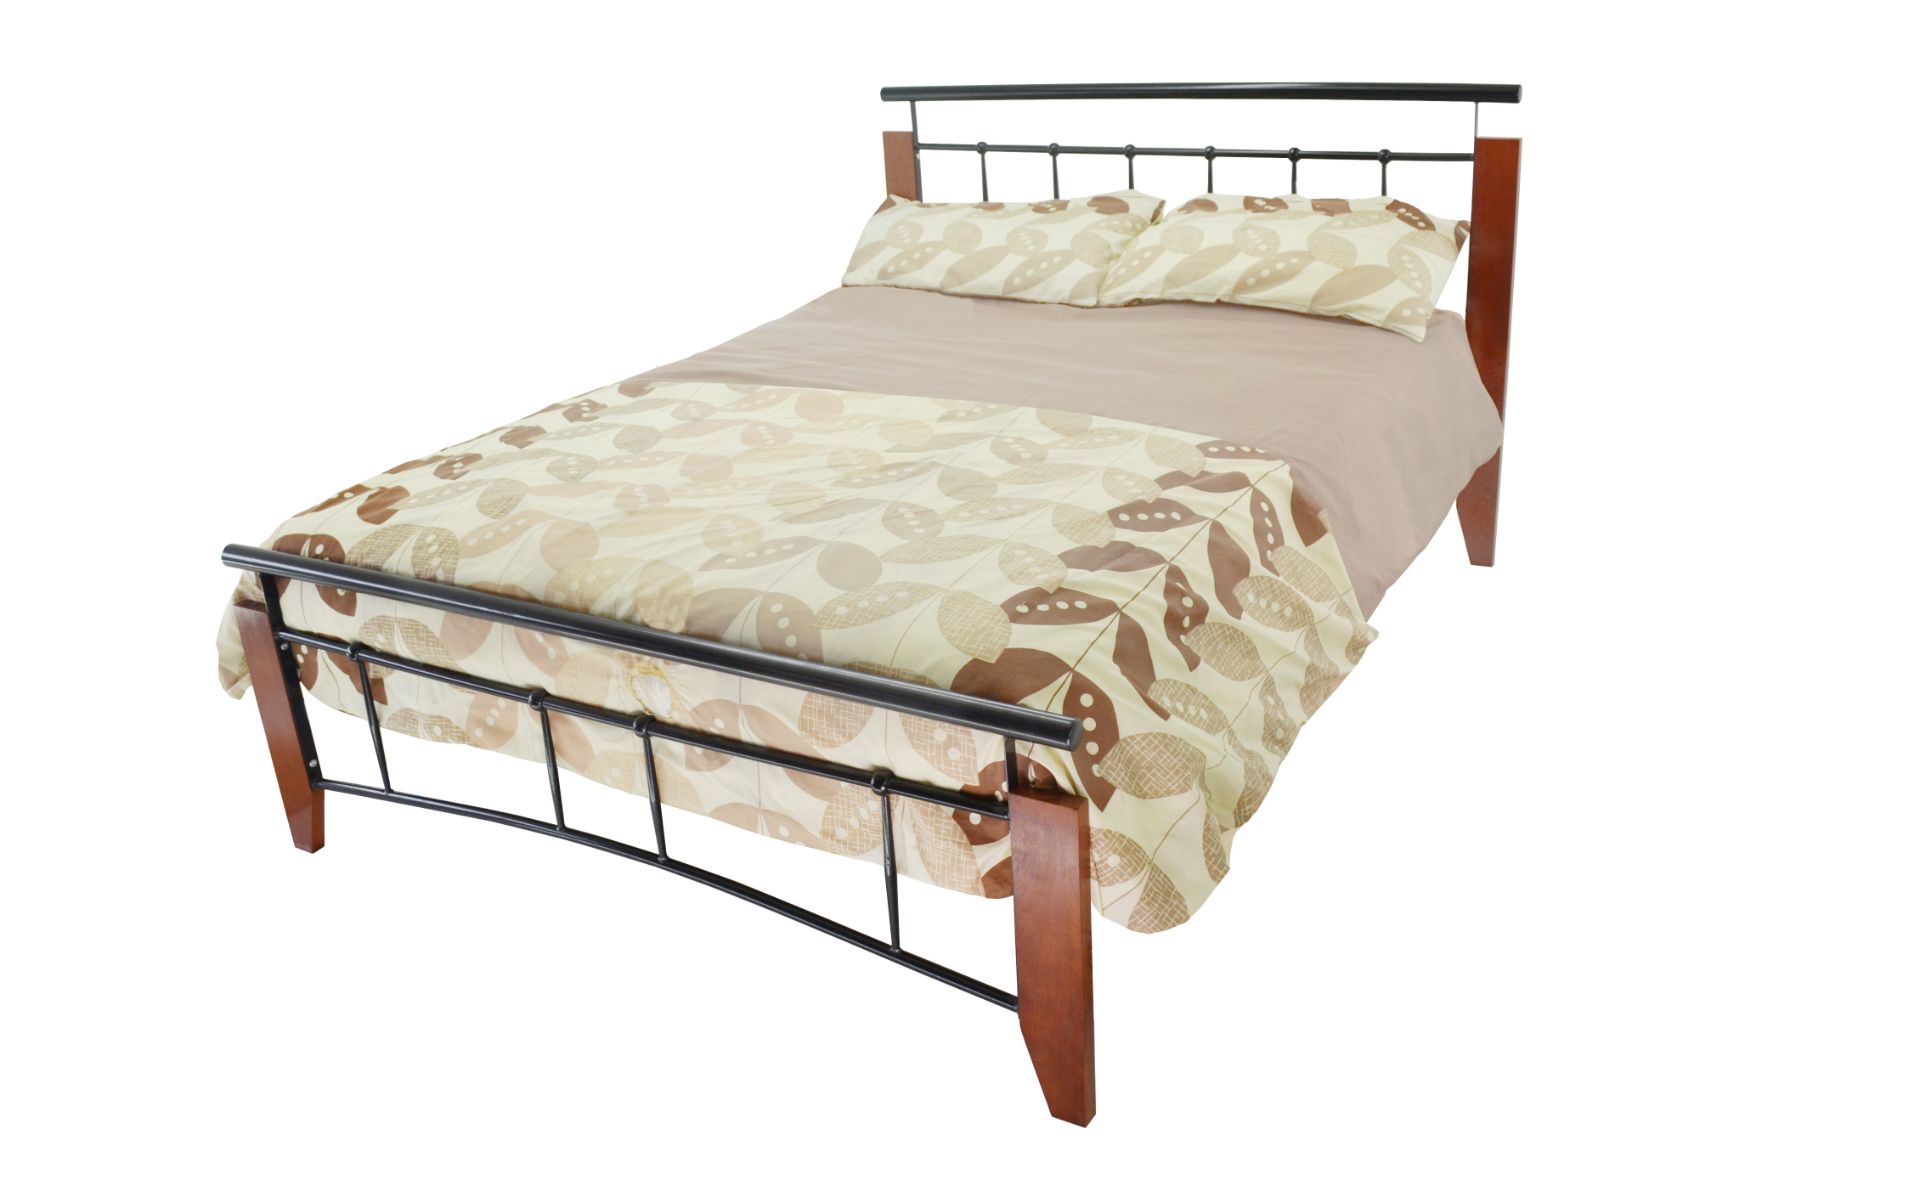 20 x Small Double 4ft Black Metal Bed Frames With Oak Effect Legs